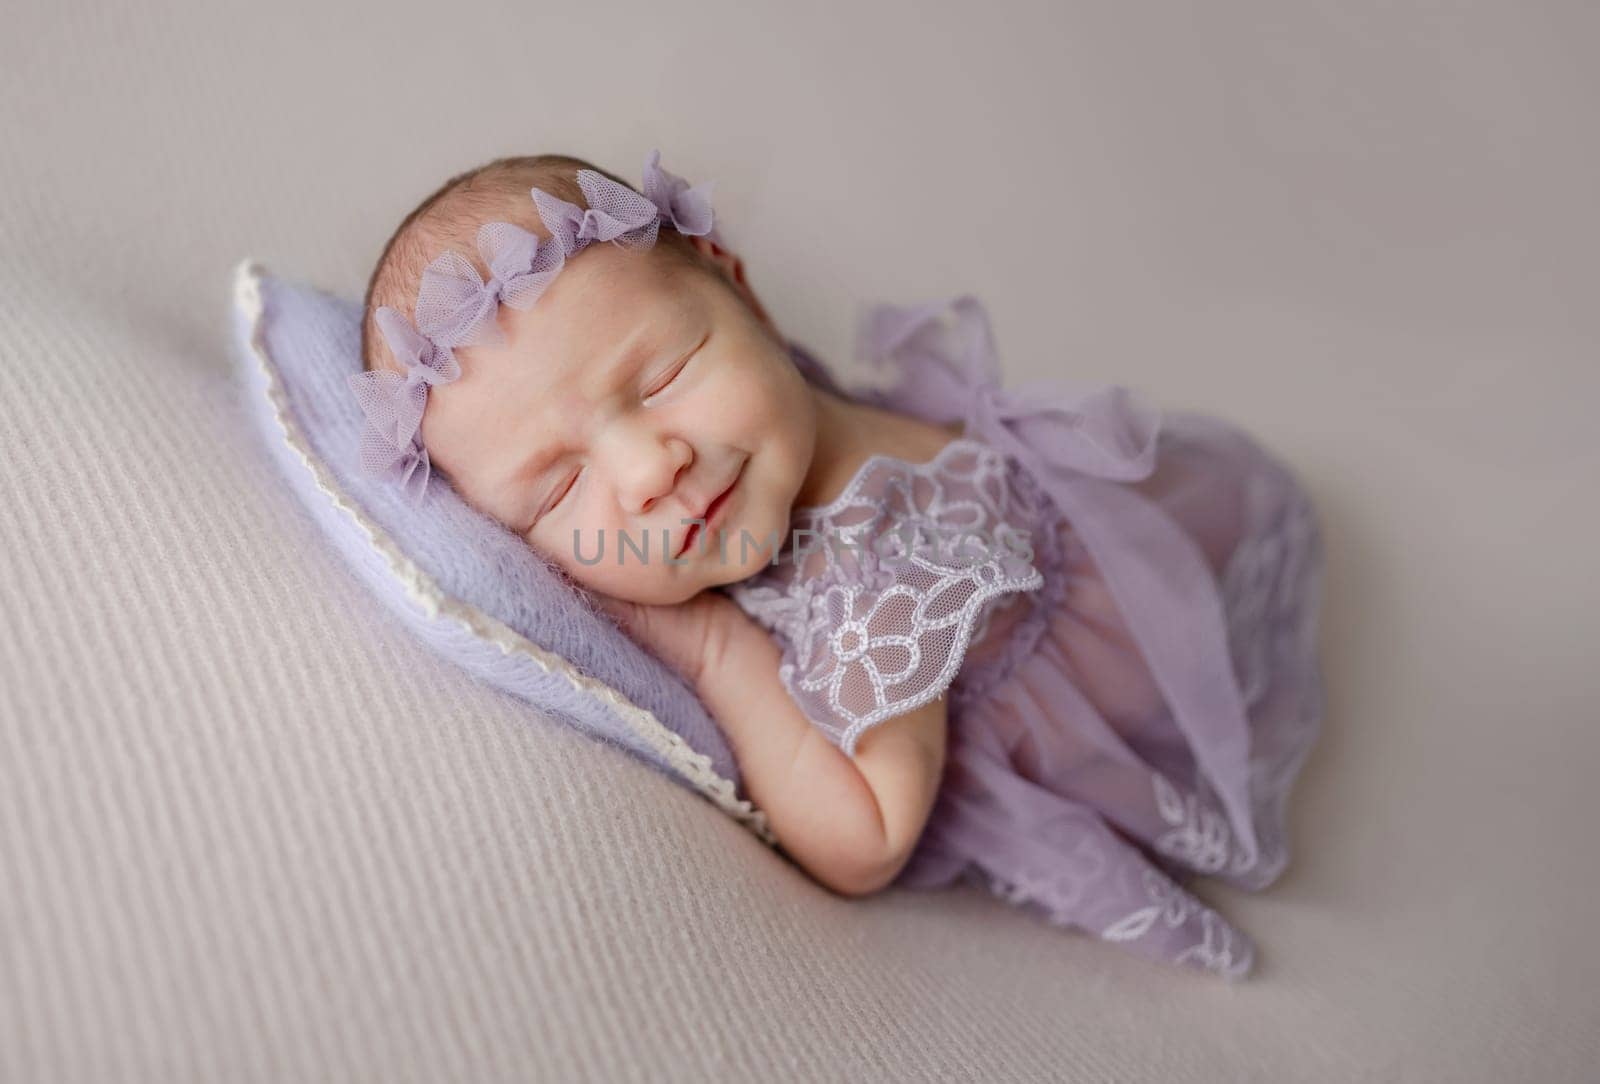 Newborn Girl In Lace Dress Sleeps And Smiles In Her Dream by tan4ikk1